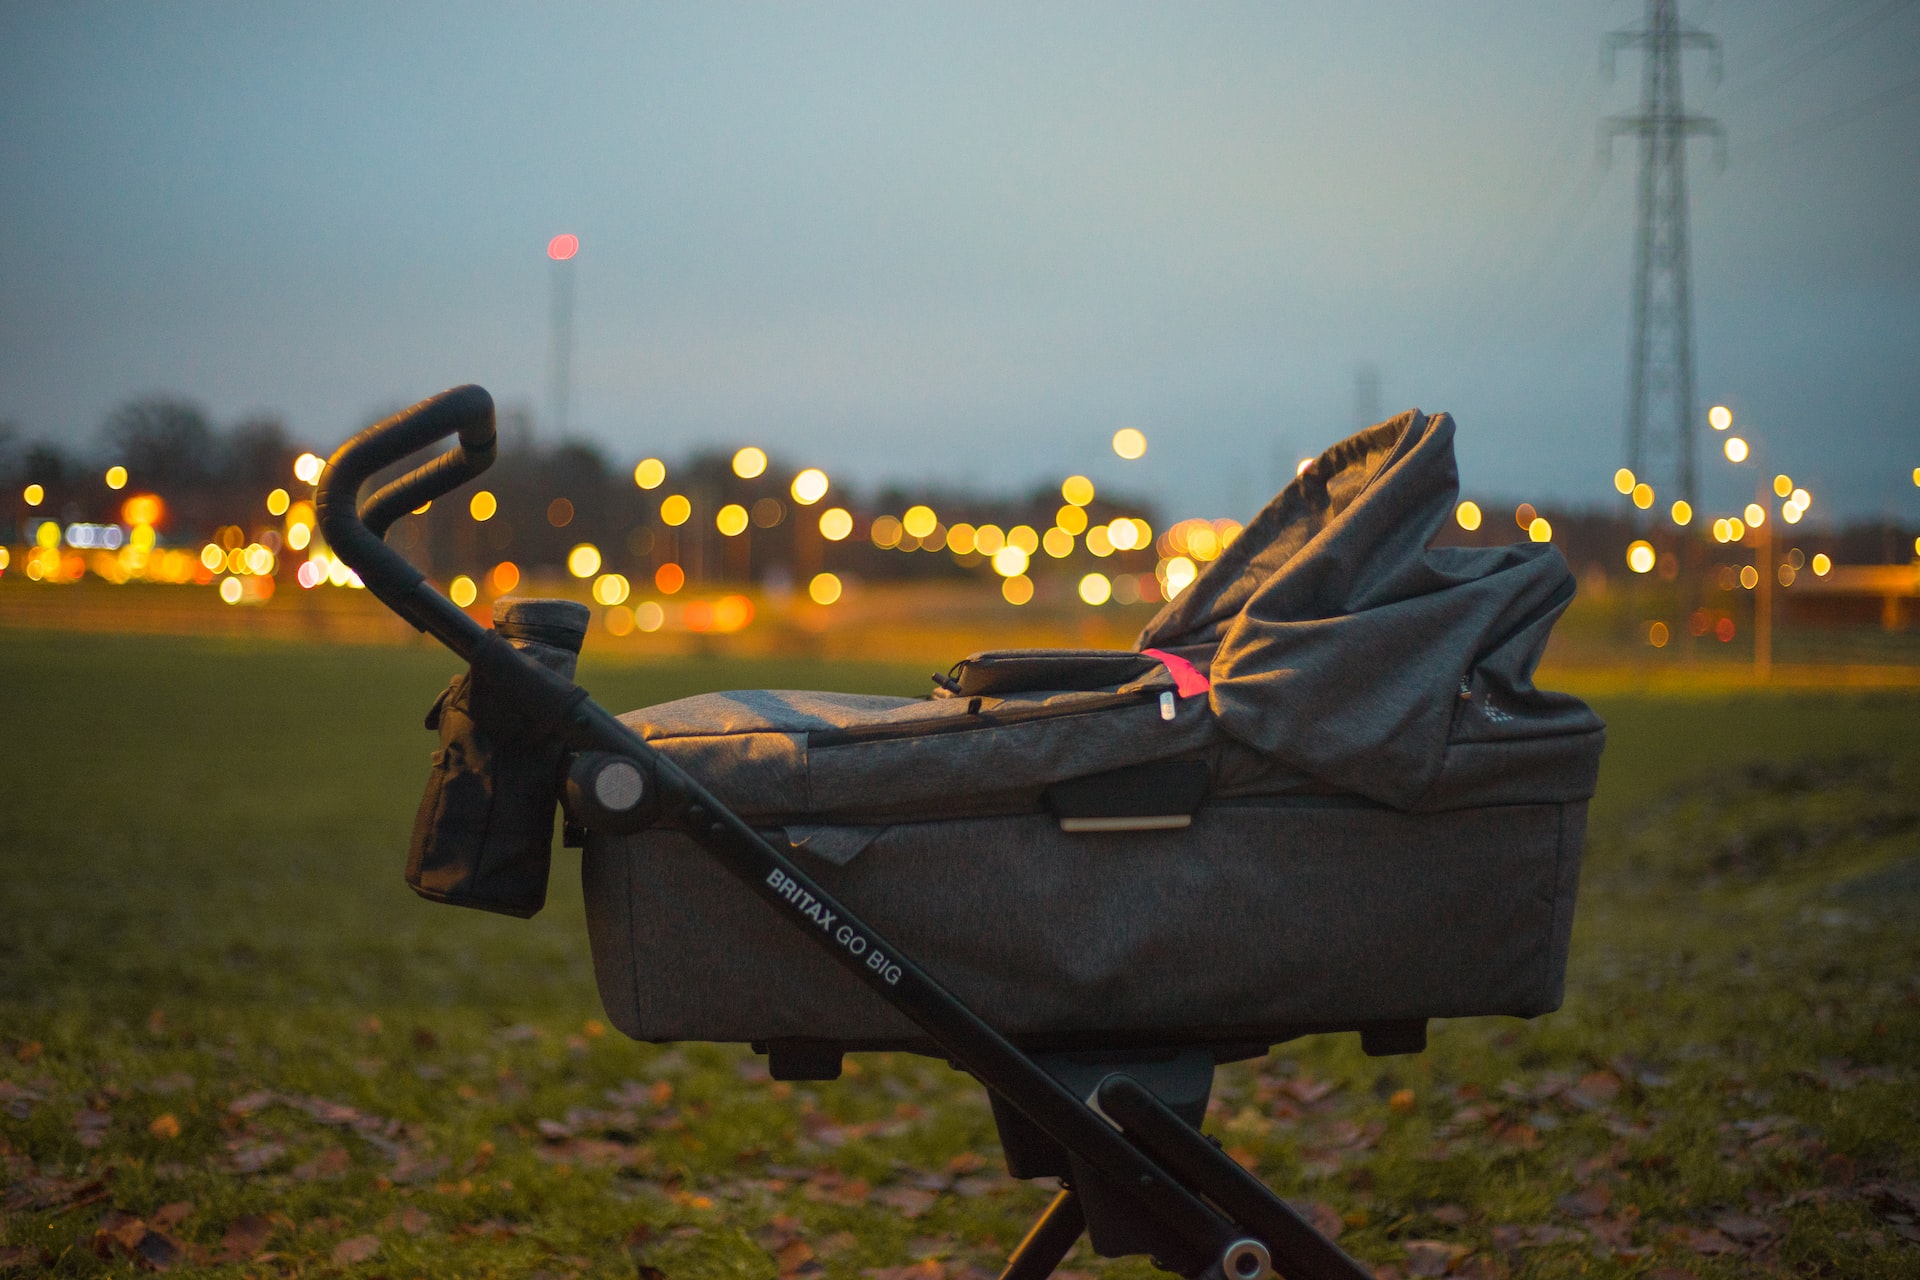 Geek insider, geekinsider, geekinsider. Com,, how does a self-driving stroller work? The lowdown on the latest parenting accessory, living